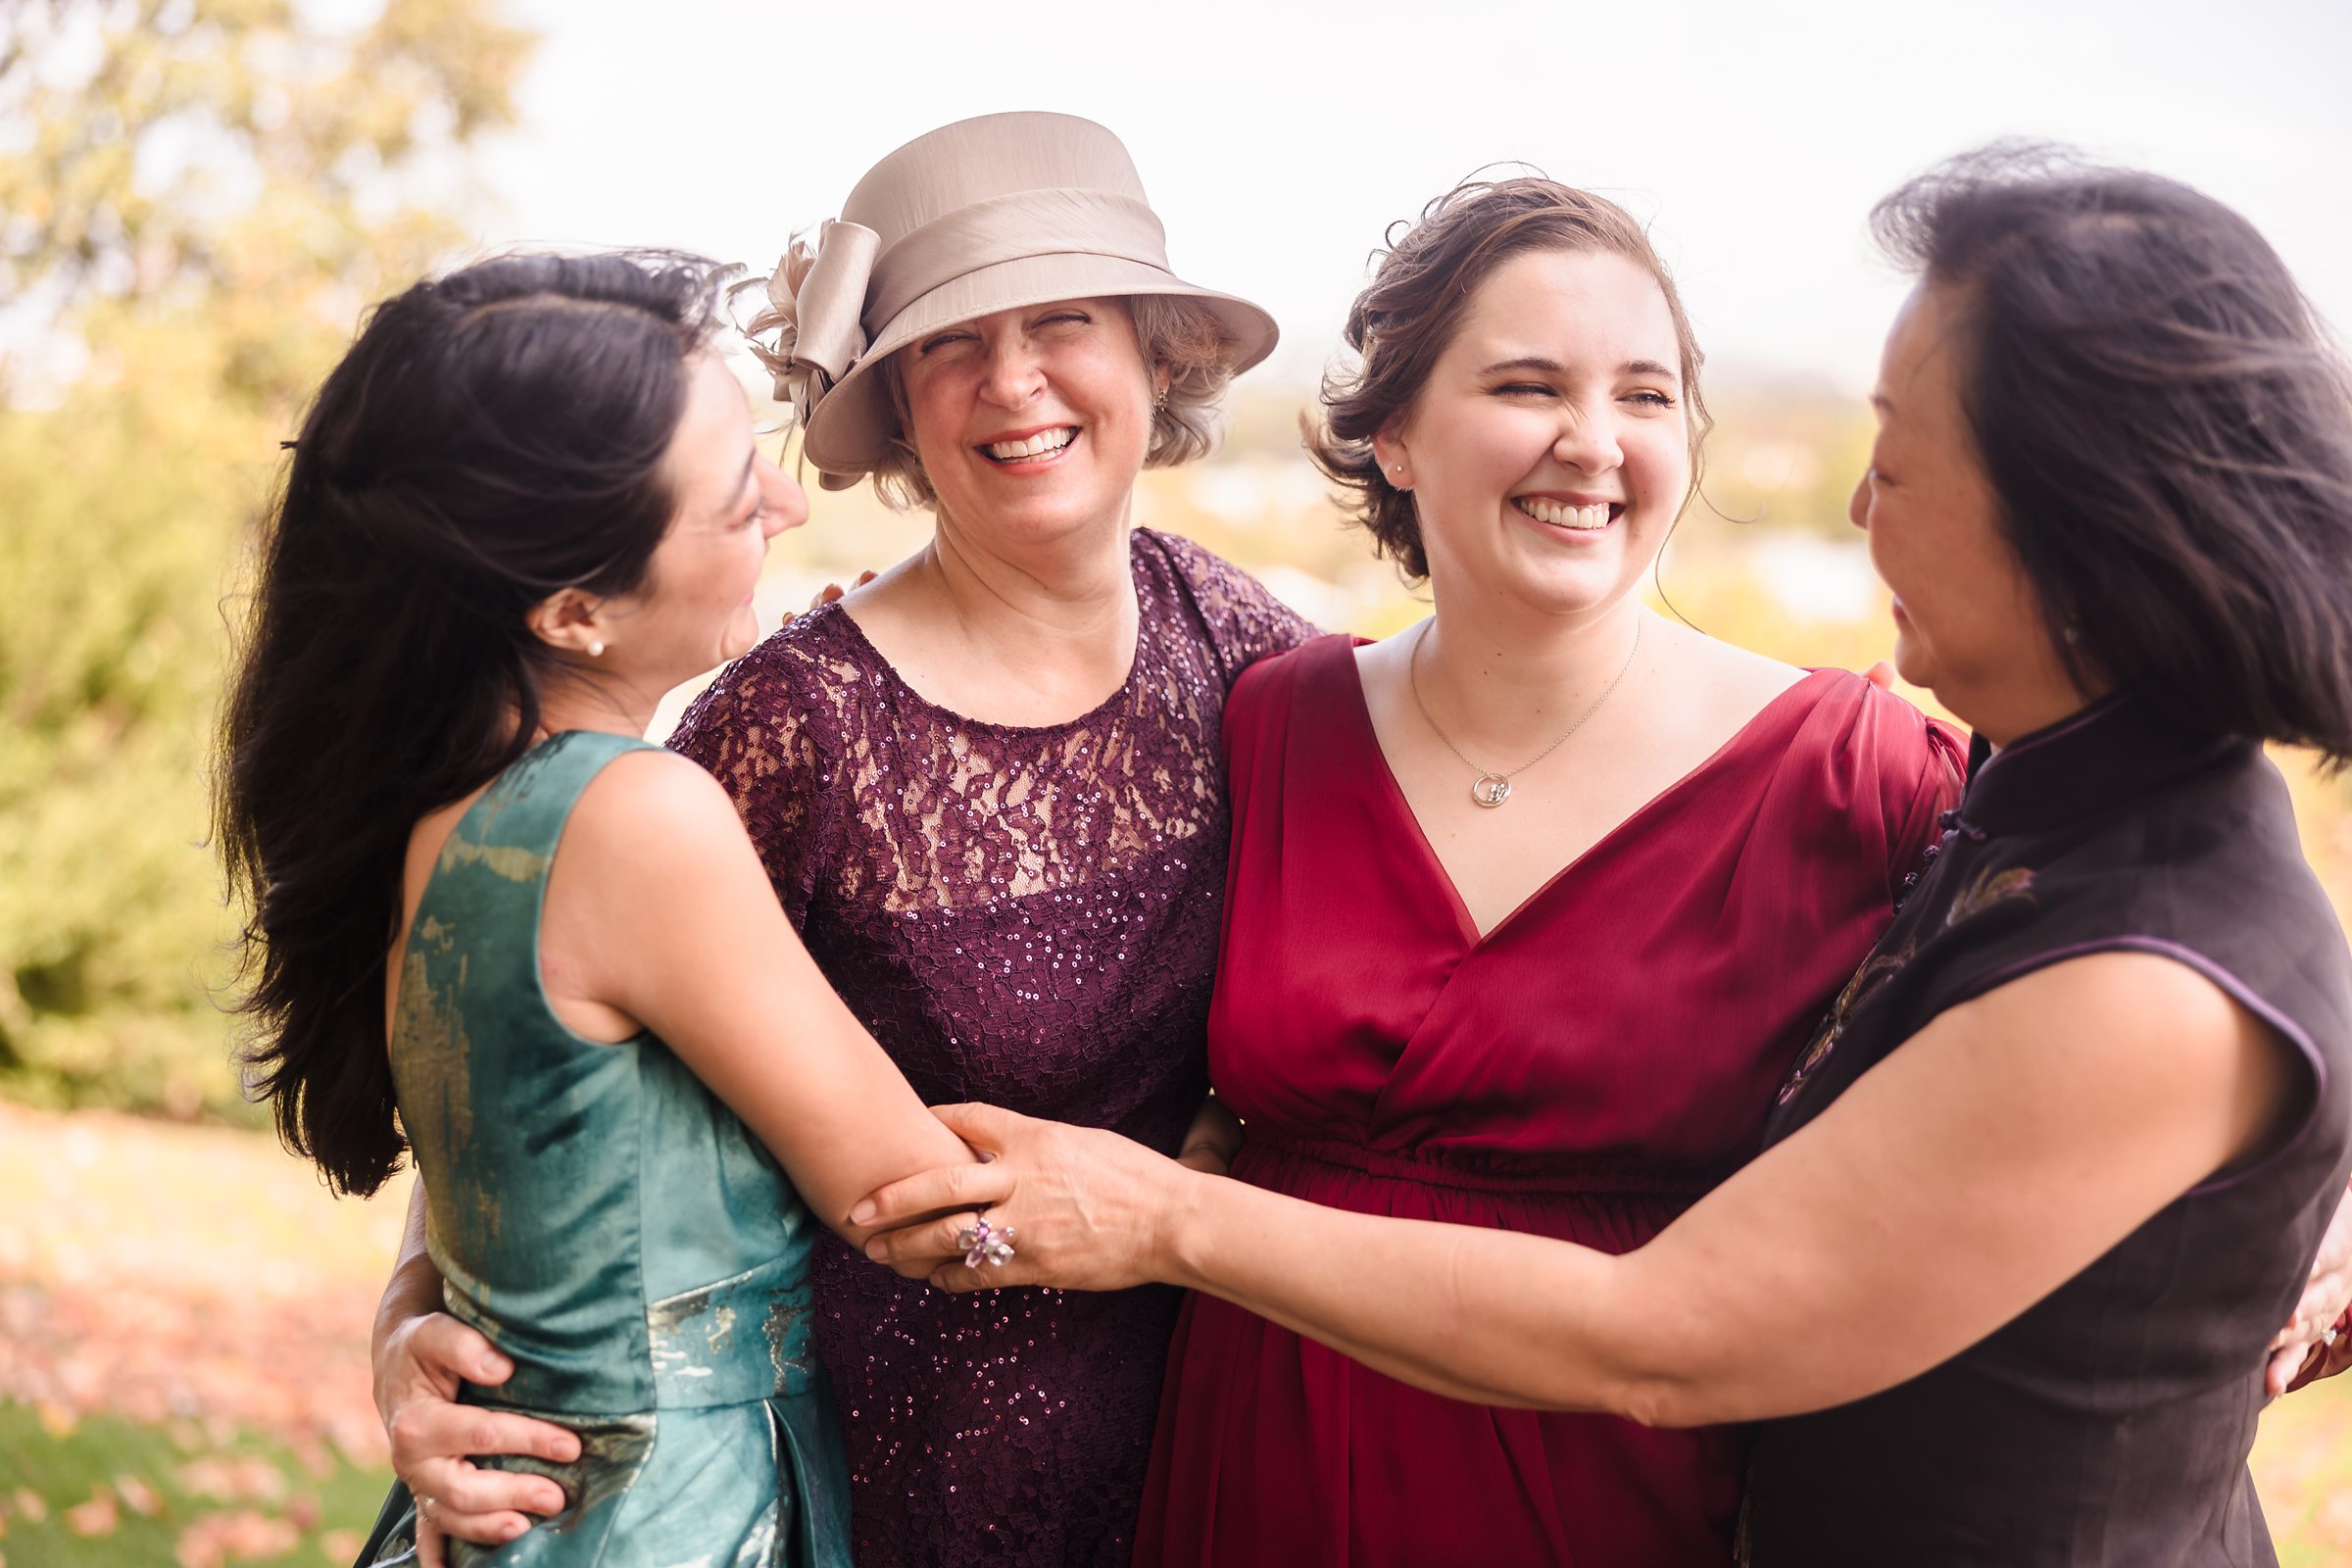 All the girls laugh together during a wedding in Washington D.C.